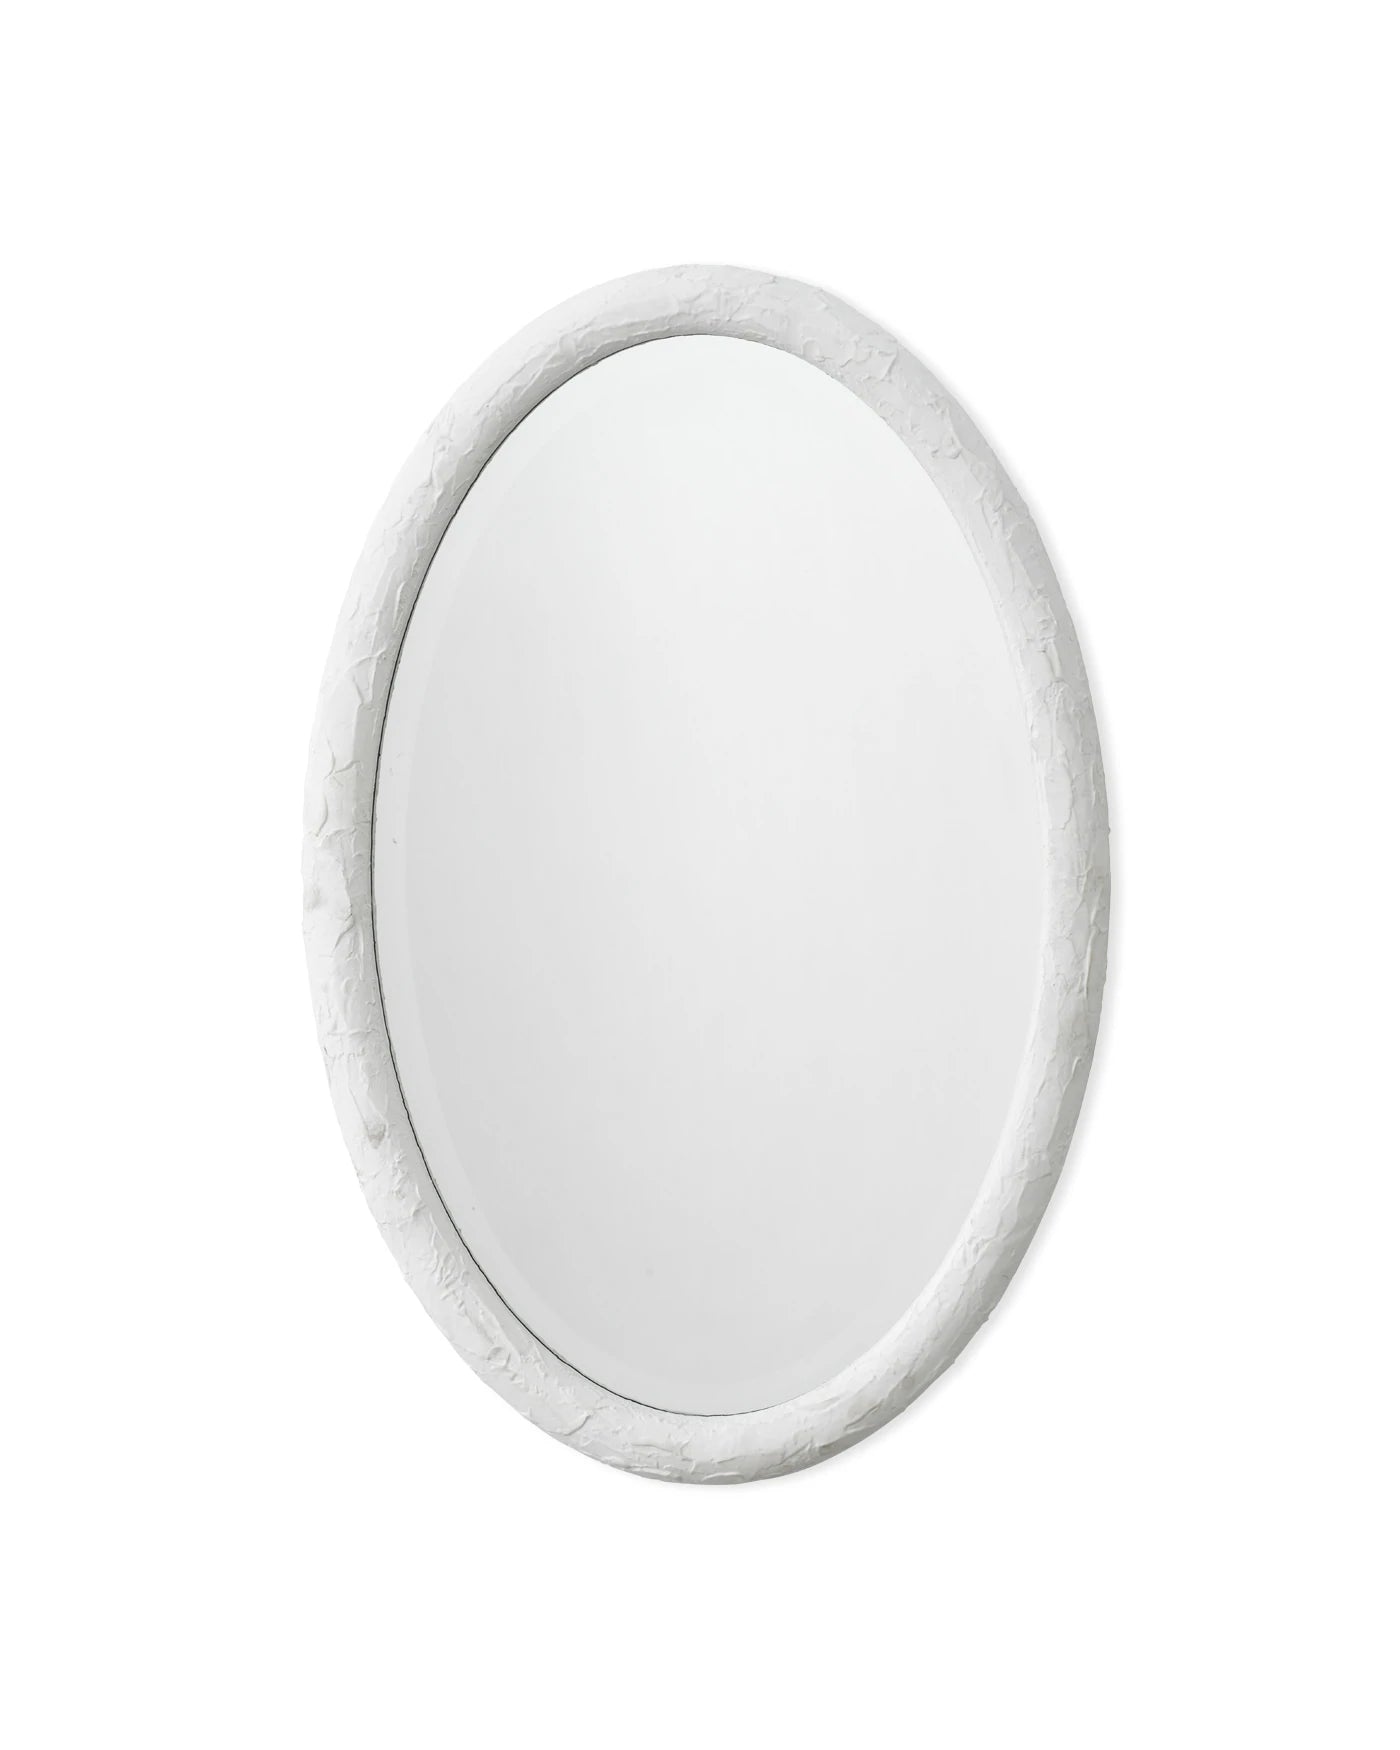 jamie young ovation oval white mirror front